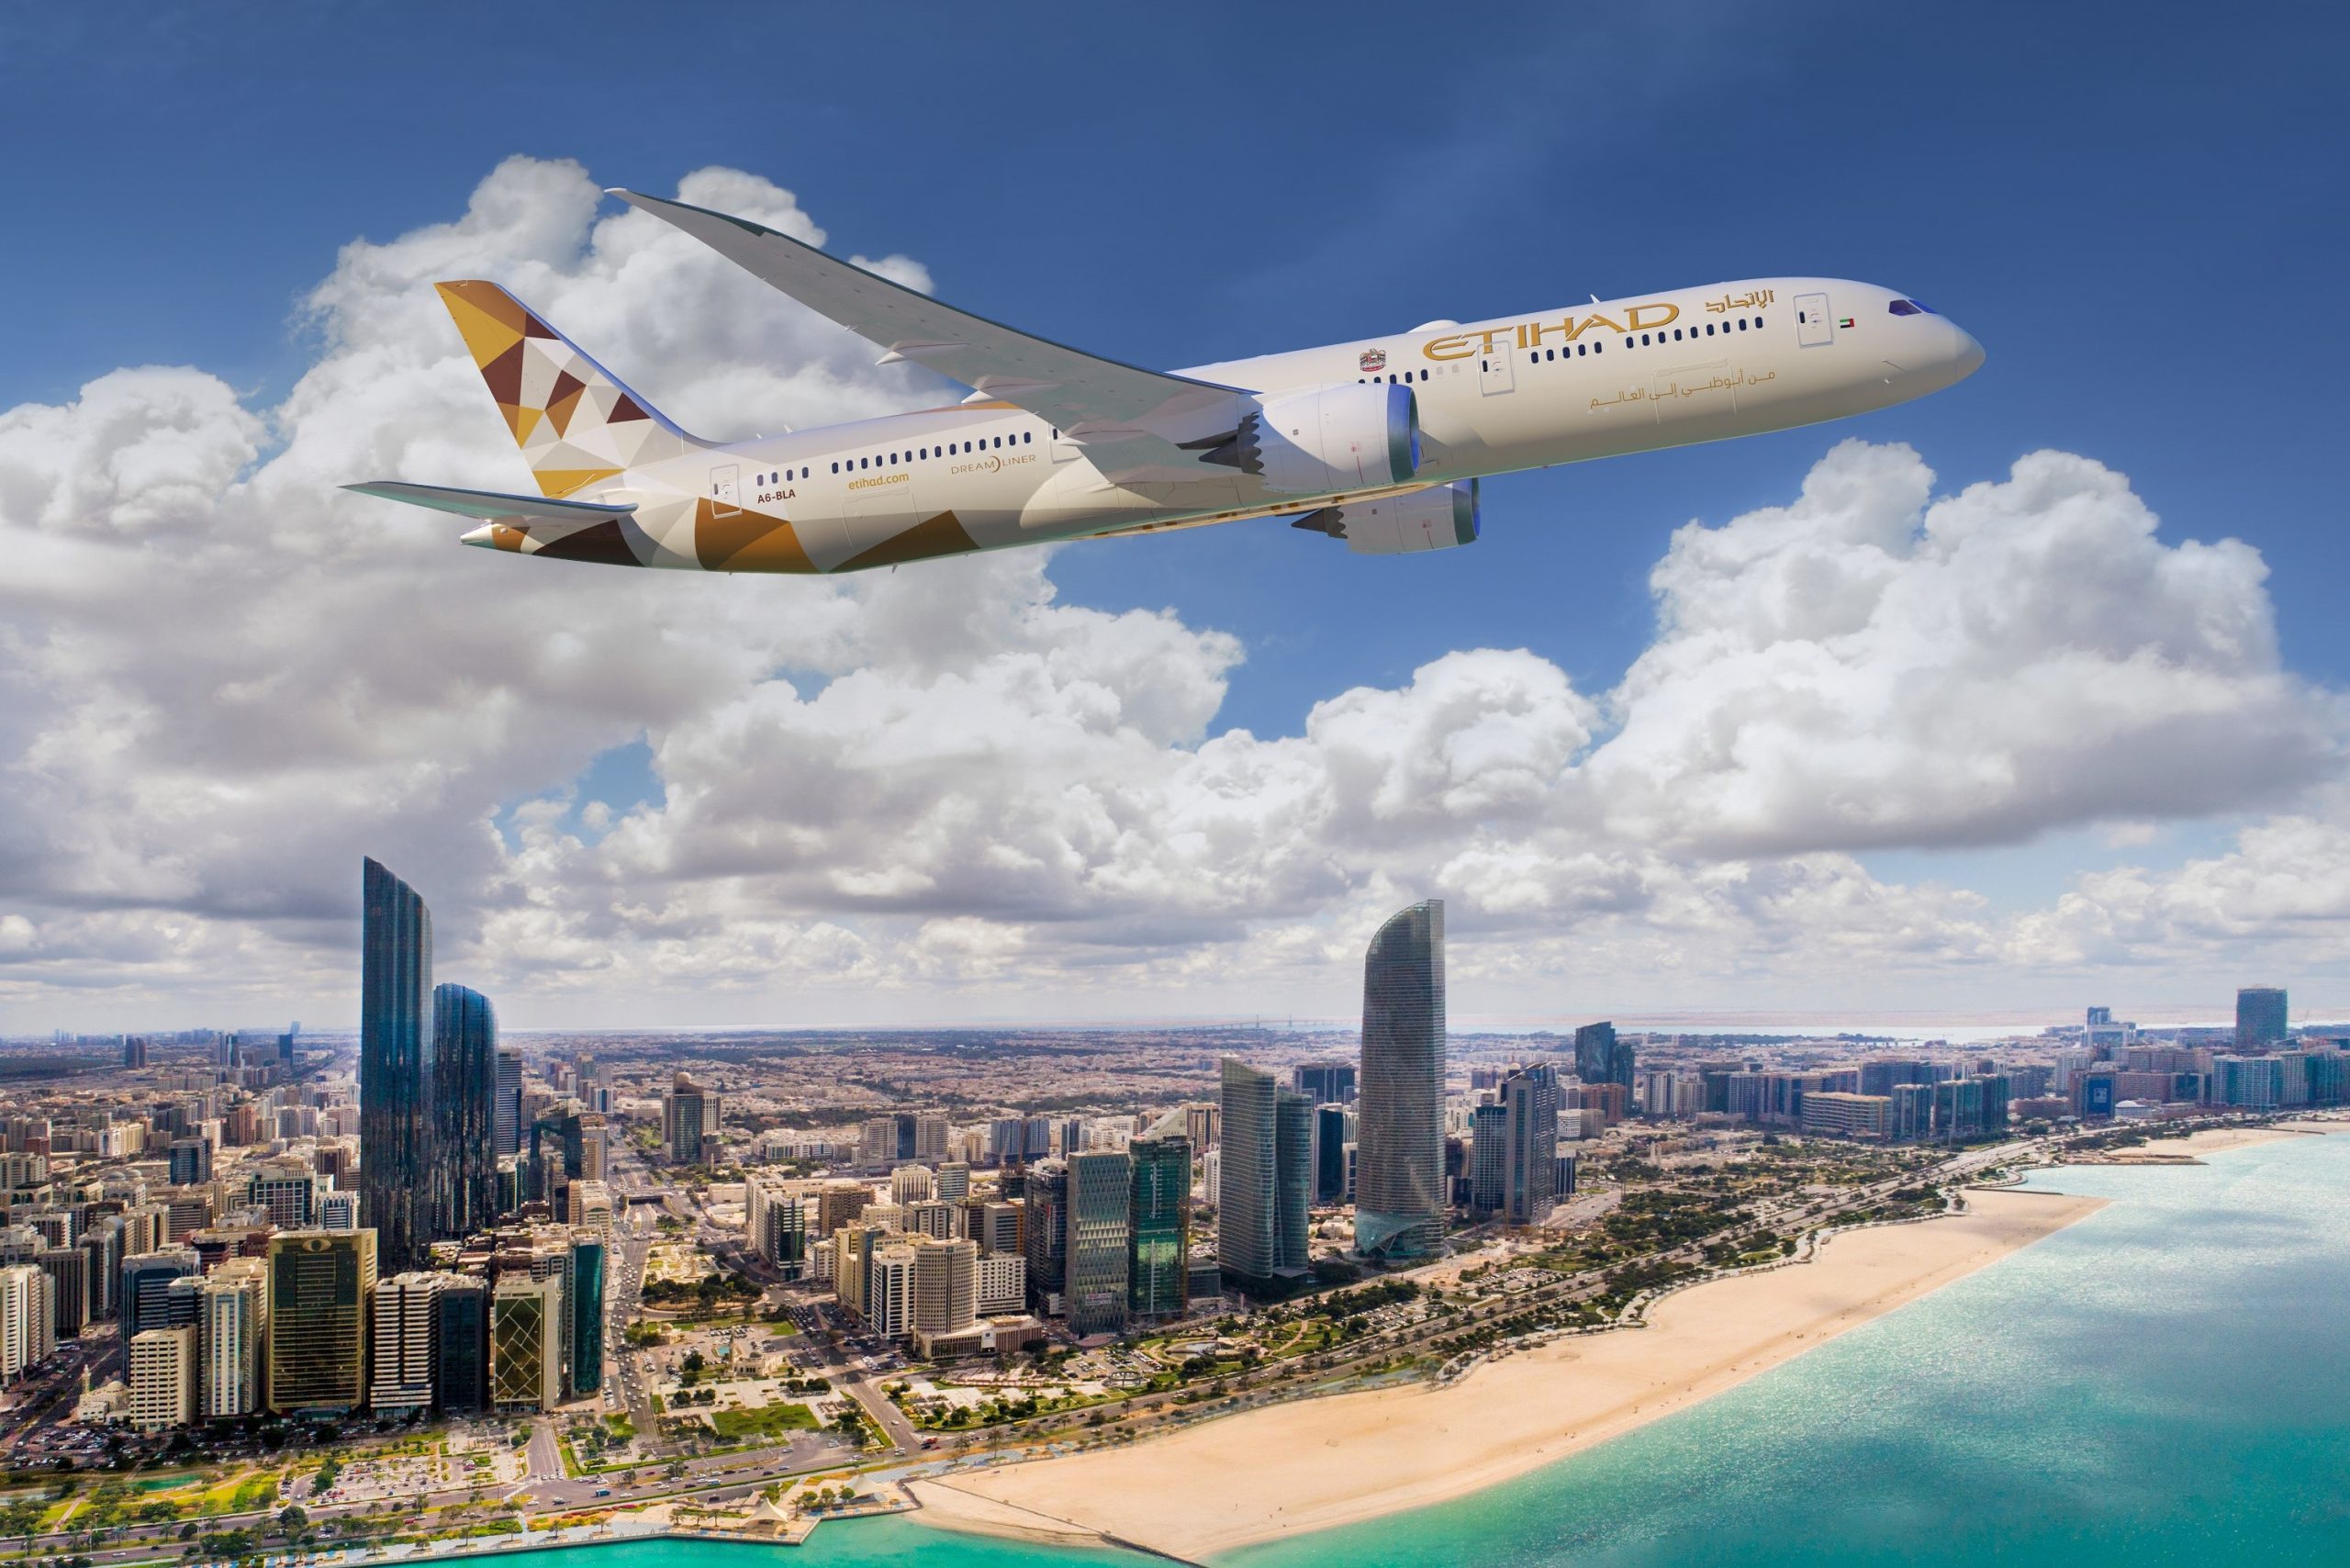 Etihad Airways partners with Tawazun Council and GE Aerospace to integrate digital solutions for flight safety and efficiency